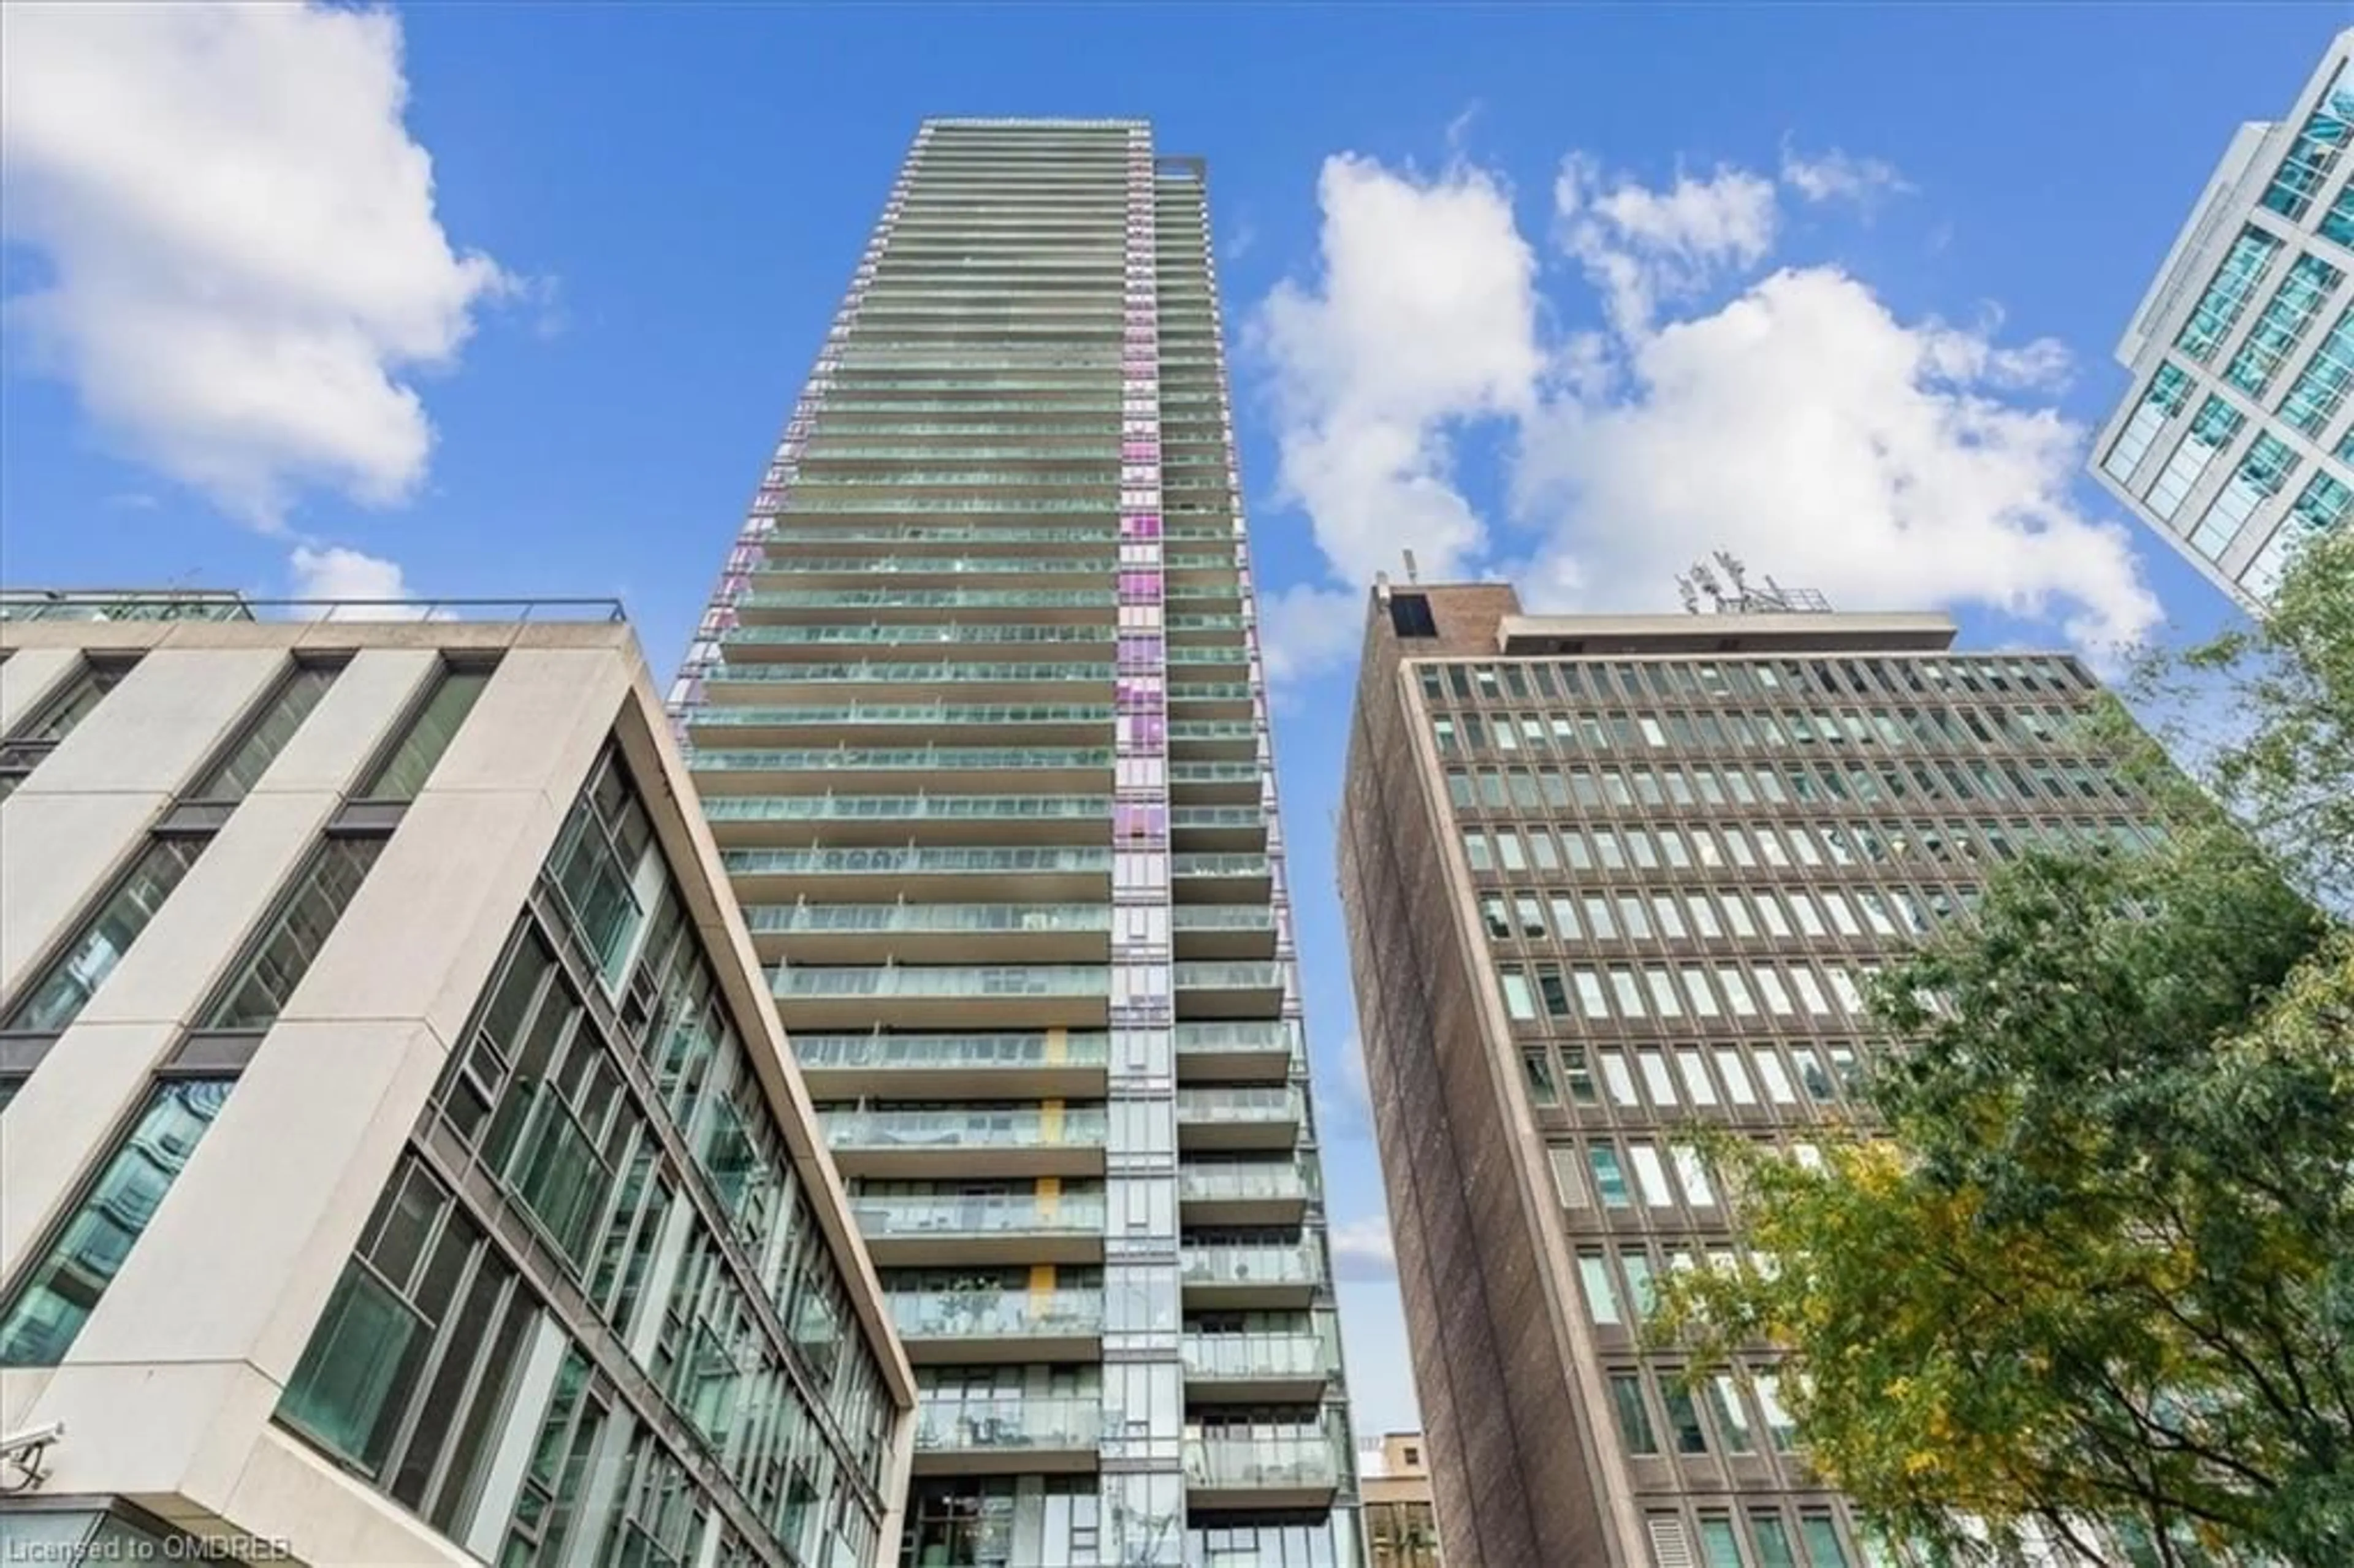 A pic from exterior of the house or condo for 33 Lombard St #4102, Toronto Ontario M5C 3H8